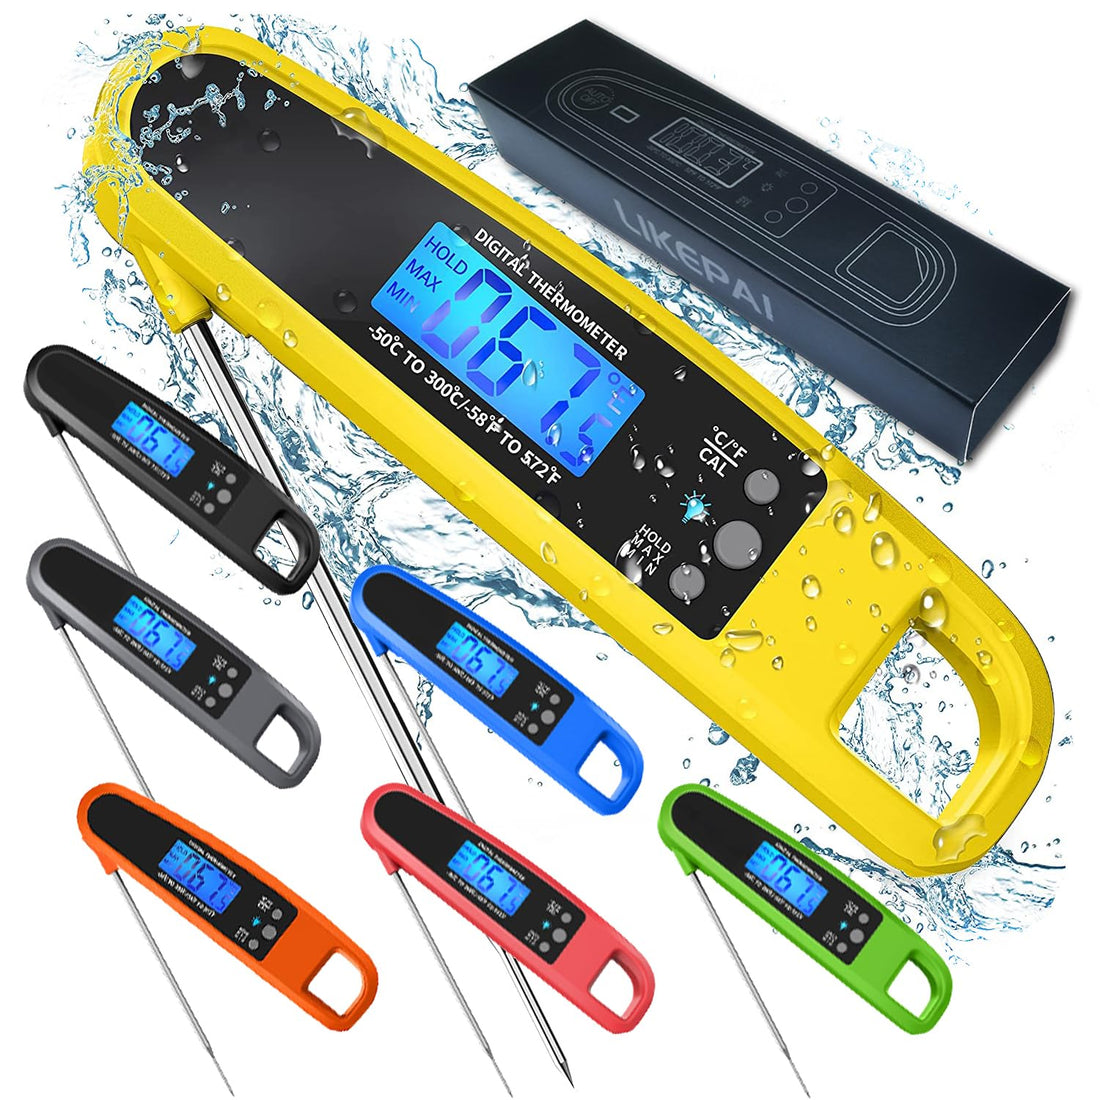 LIKEPAI Instant Read Meat Thermometer for Kitchen Cooking, Ultra Fast Precise Waterproof Digital Food Thermometer with Backlight, Magnet and Foldable Probe for Deep Fry, Outdoor BBQ, Grill(Yellow)